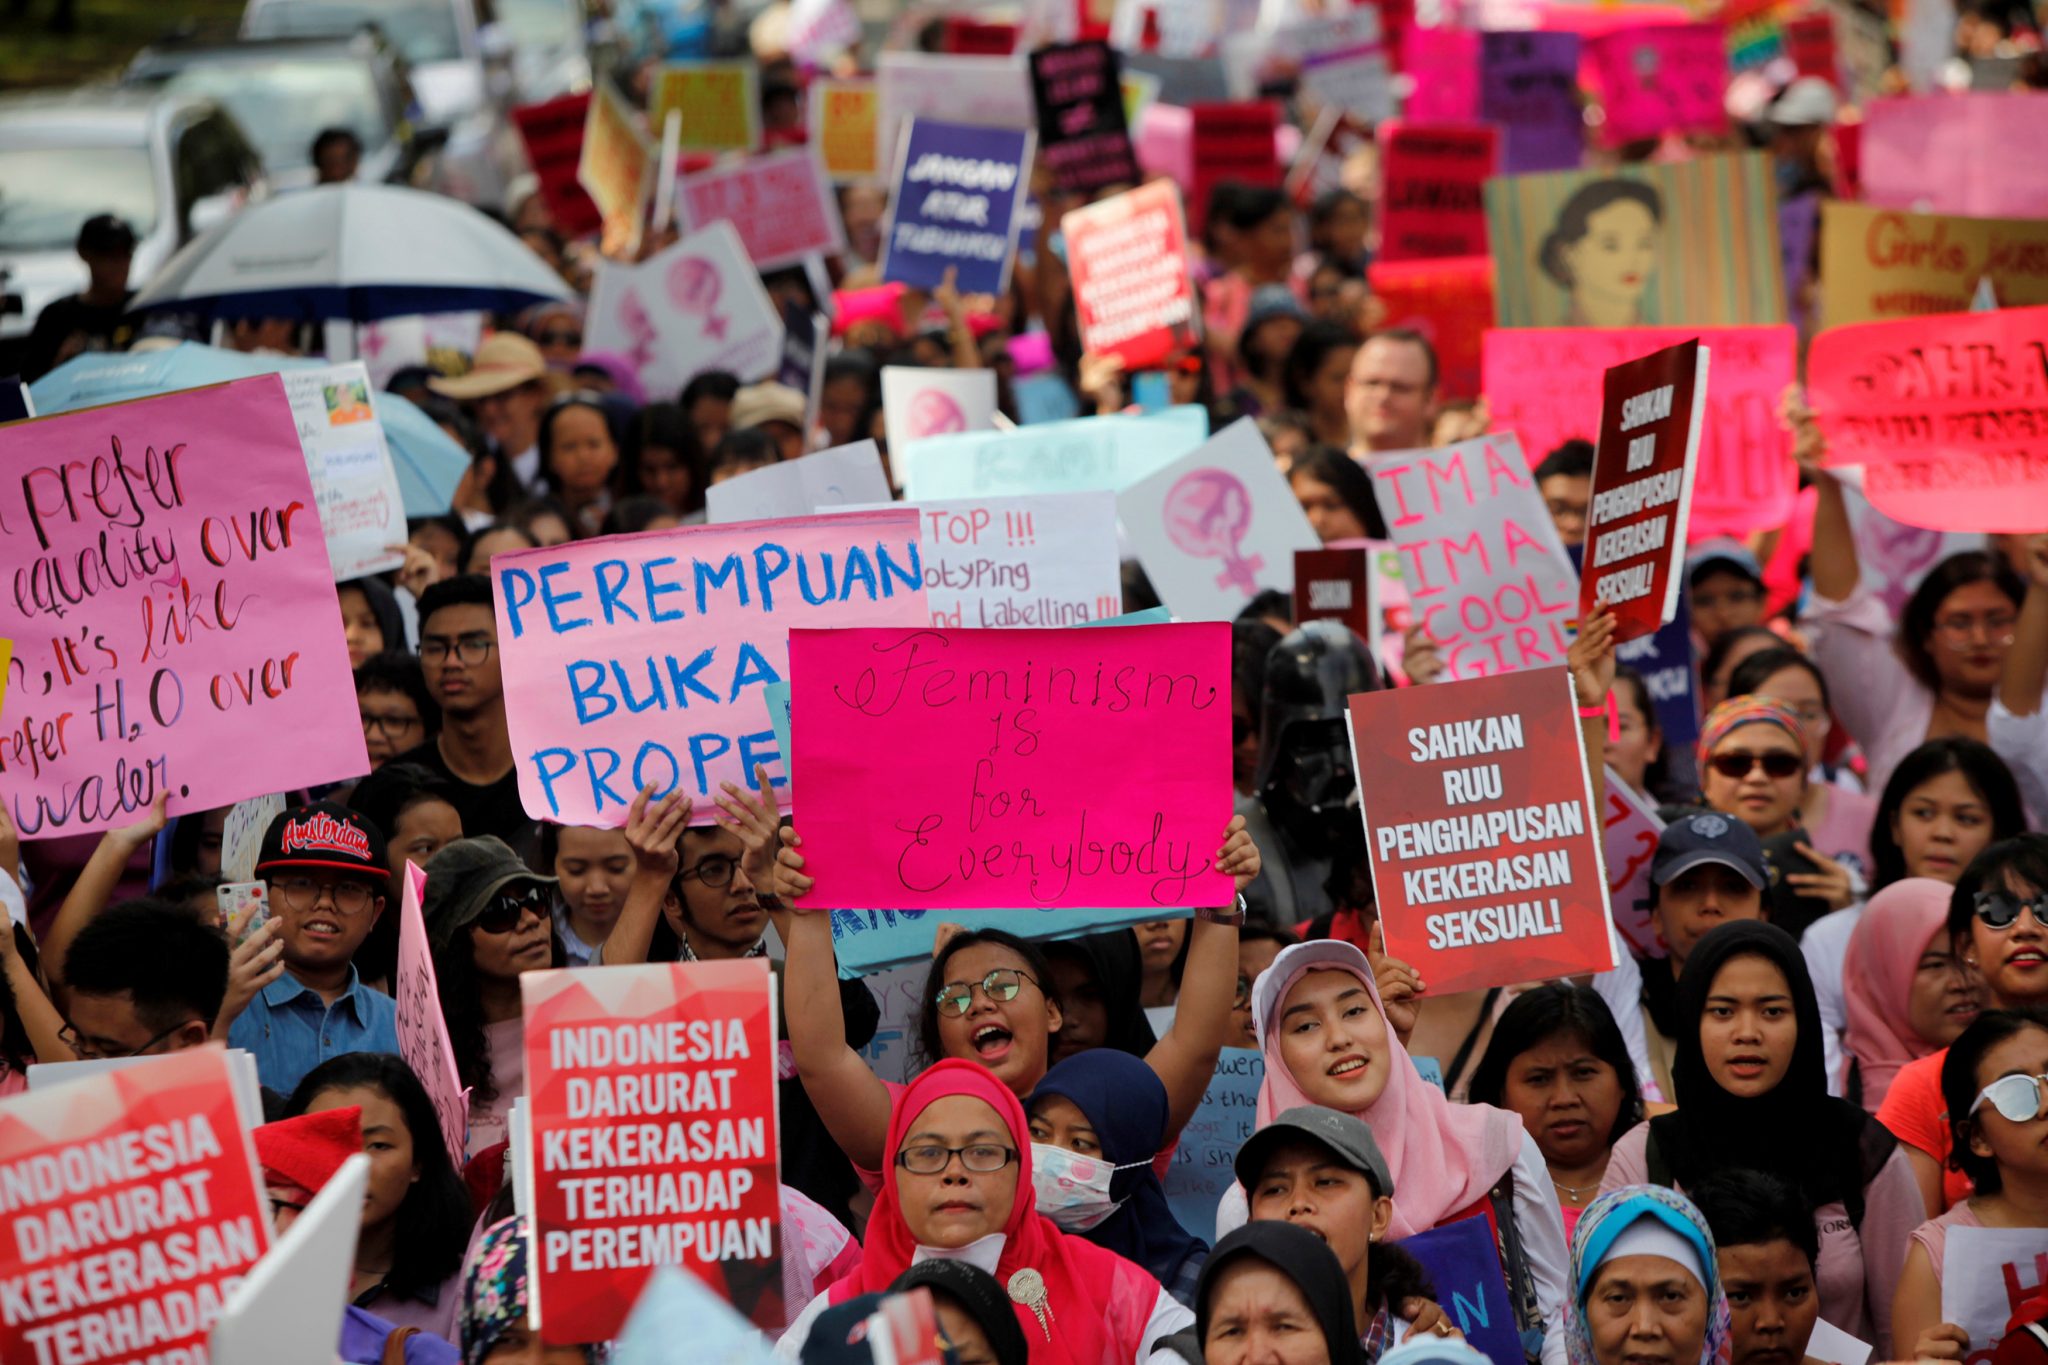 Empowering women’s rights in Indonesia